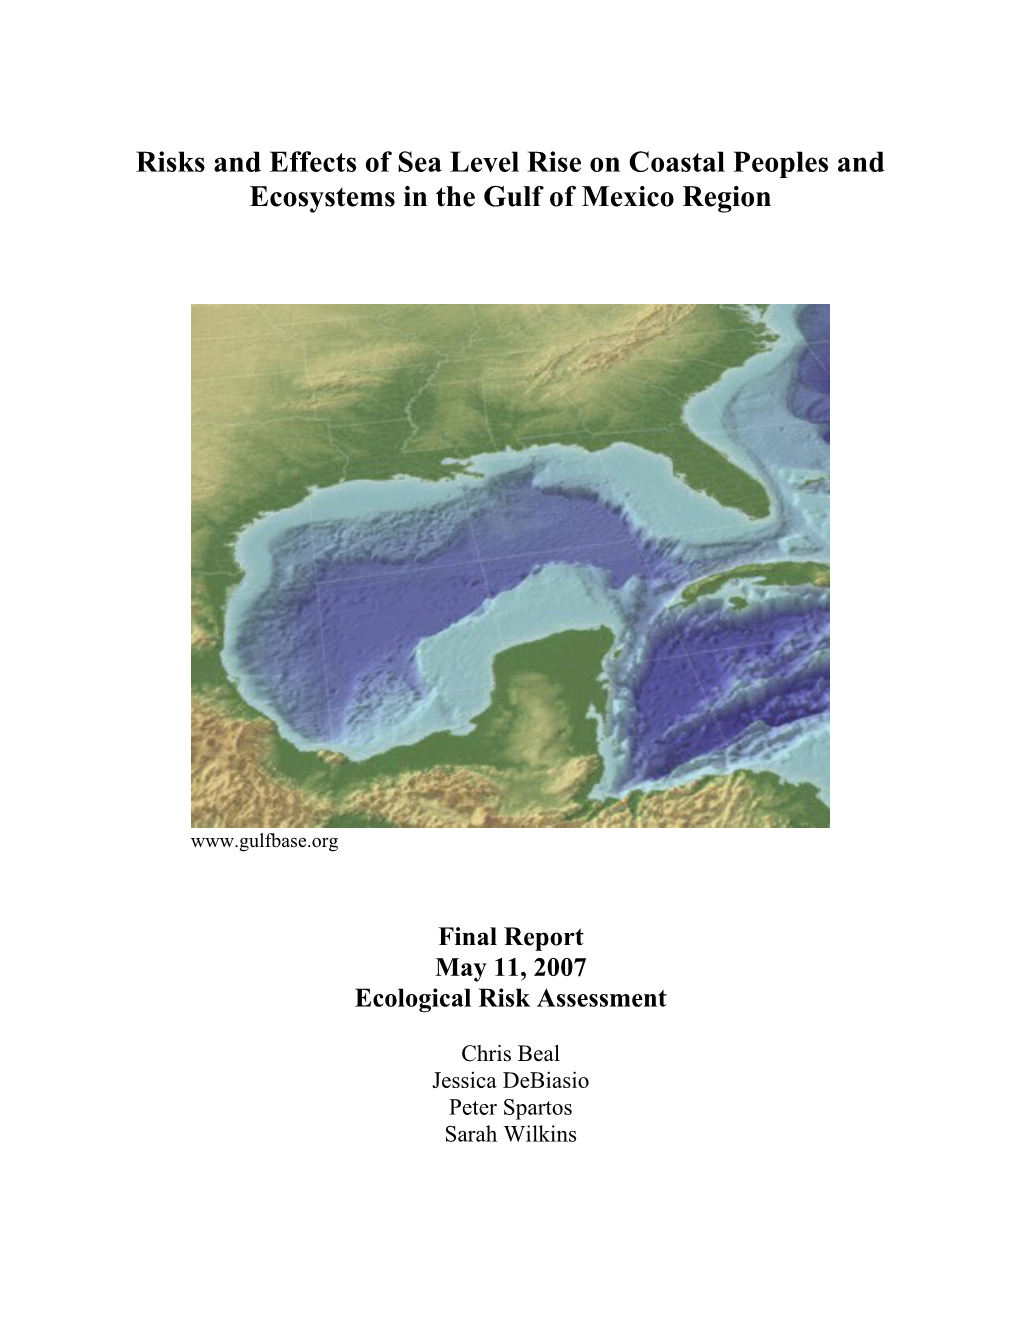 Risks and Effects of Sea Level Rise on Coastal Peoples and Ecosystems in the Gulf of Mexico